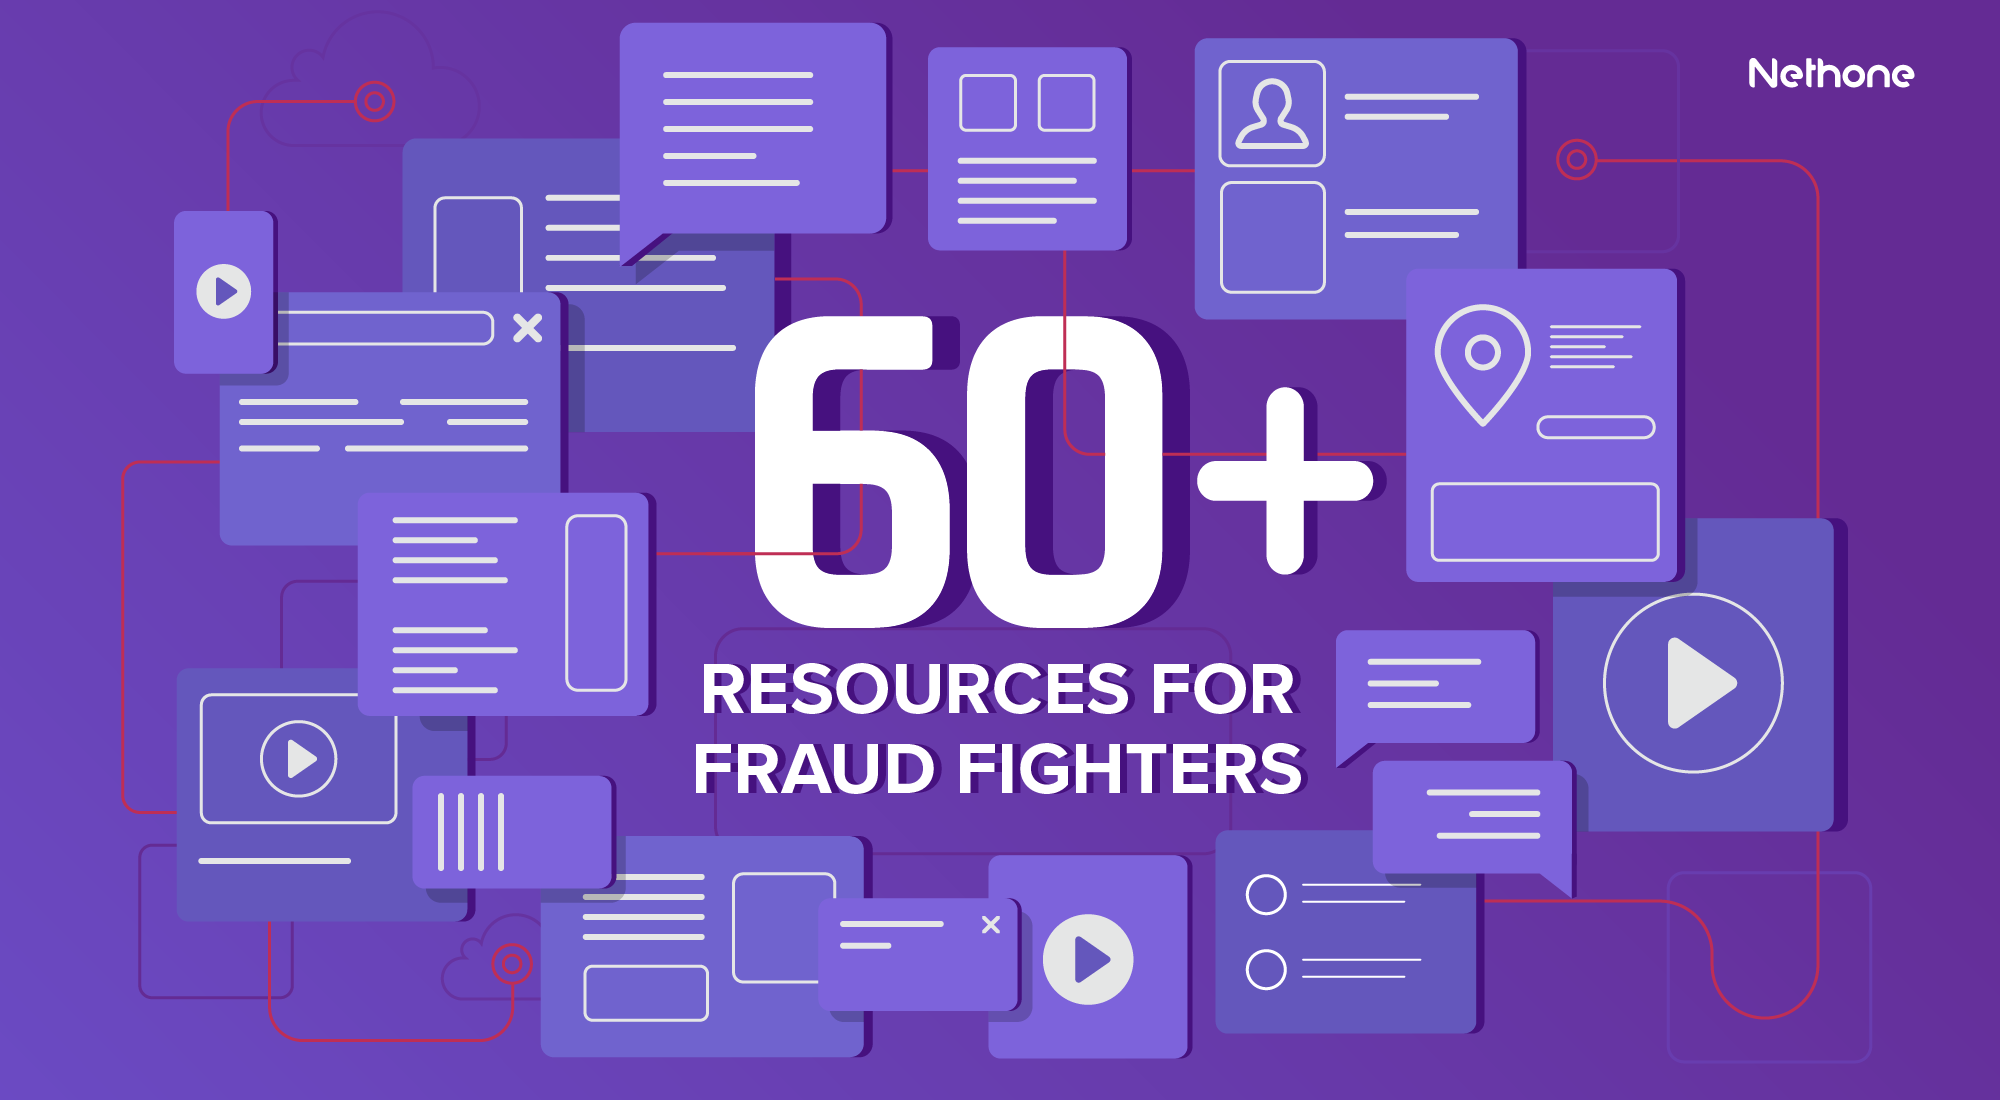 Nethone Resources Fraud Fighters